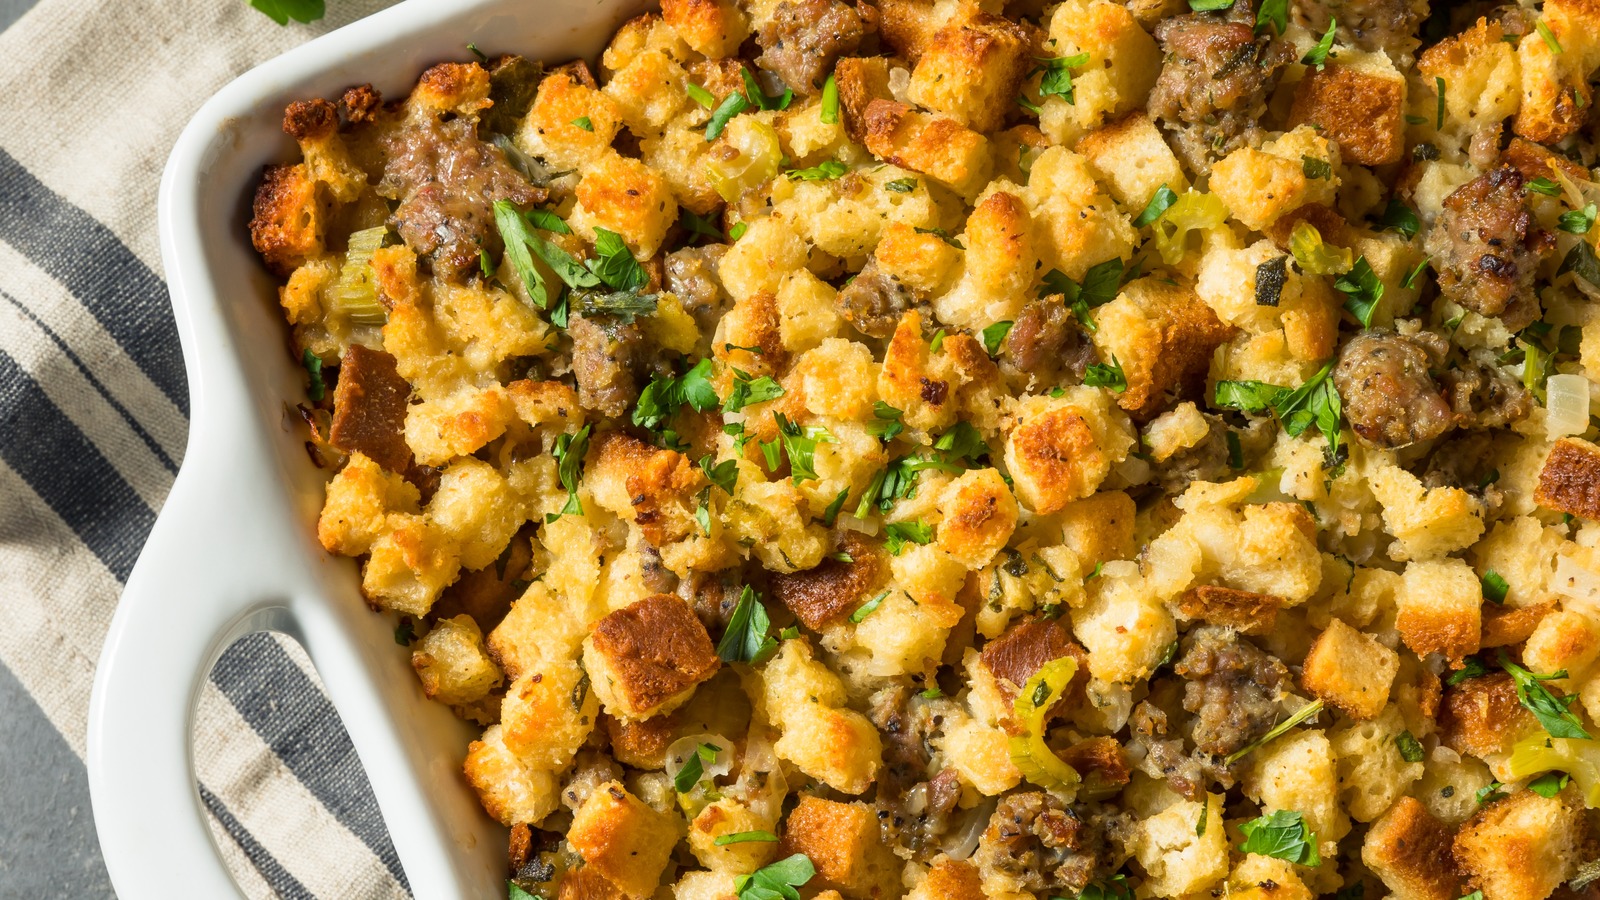 The Unexpected Trick For Preventing Soggy Thanksgiving Stuffing